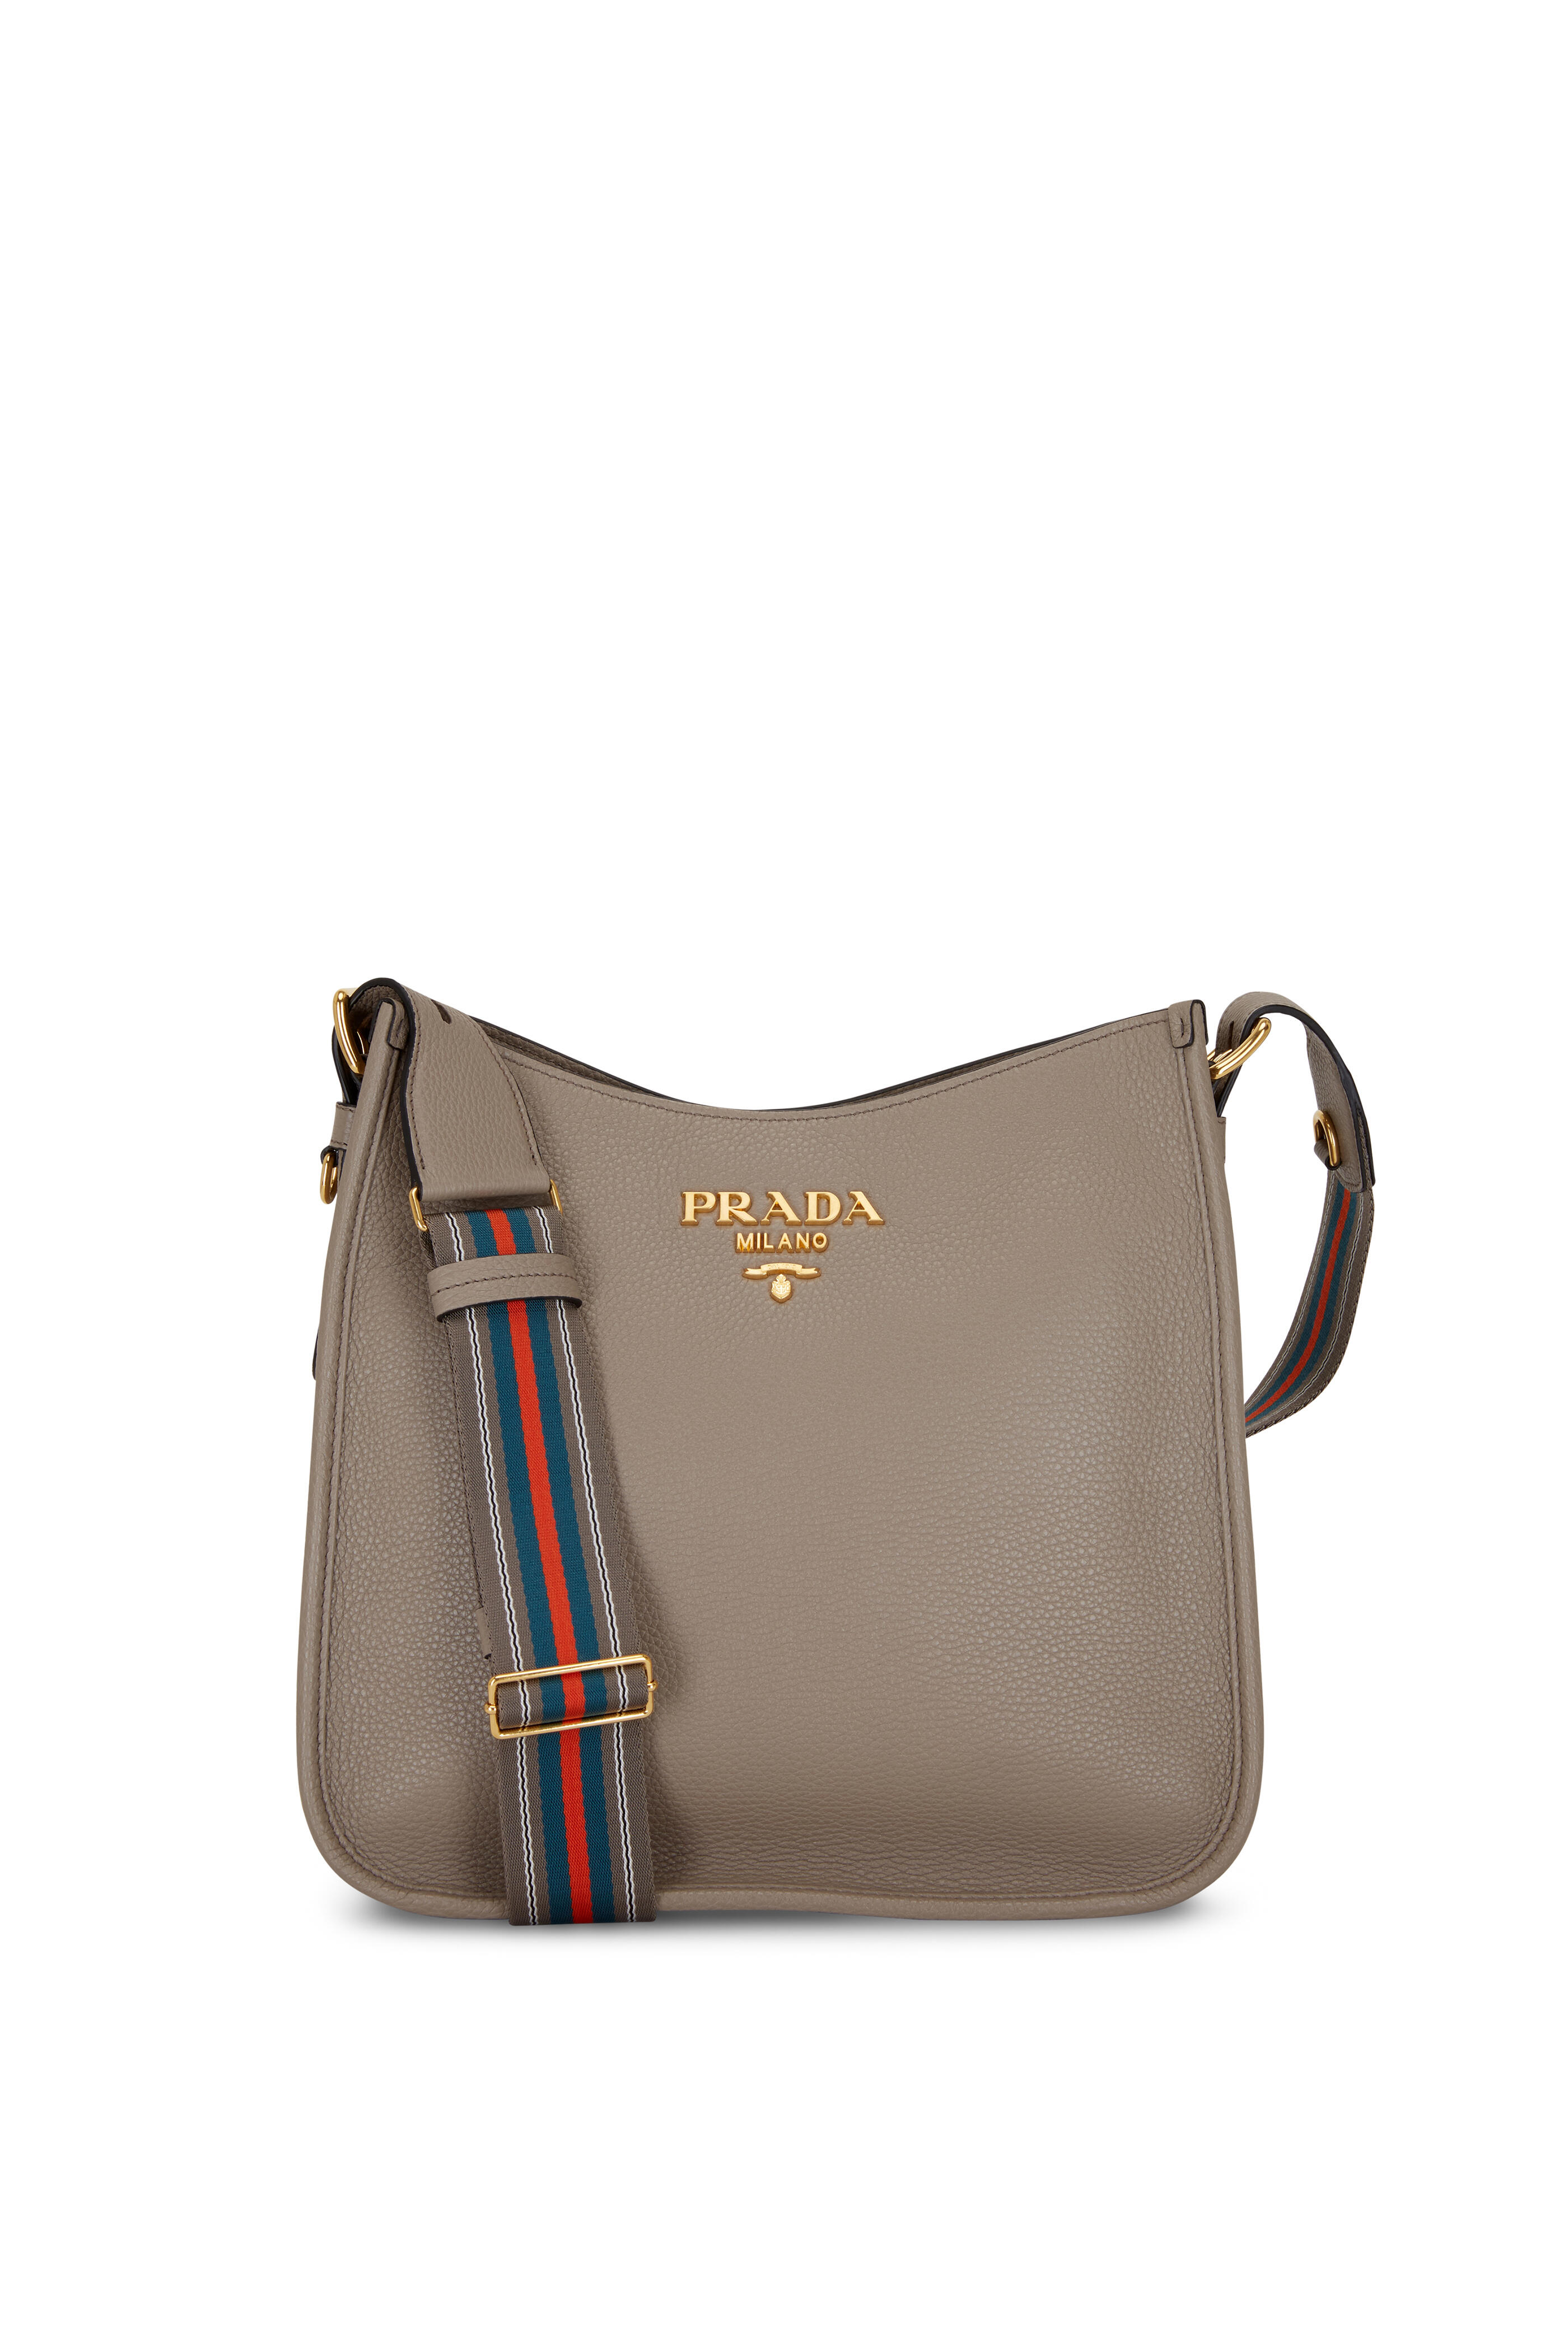 Prada Women's Cipria Saffiano Leather Snap Wallet | by Mitchell Stores